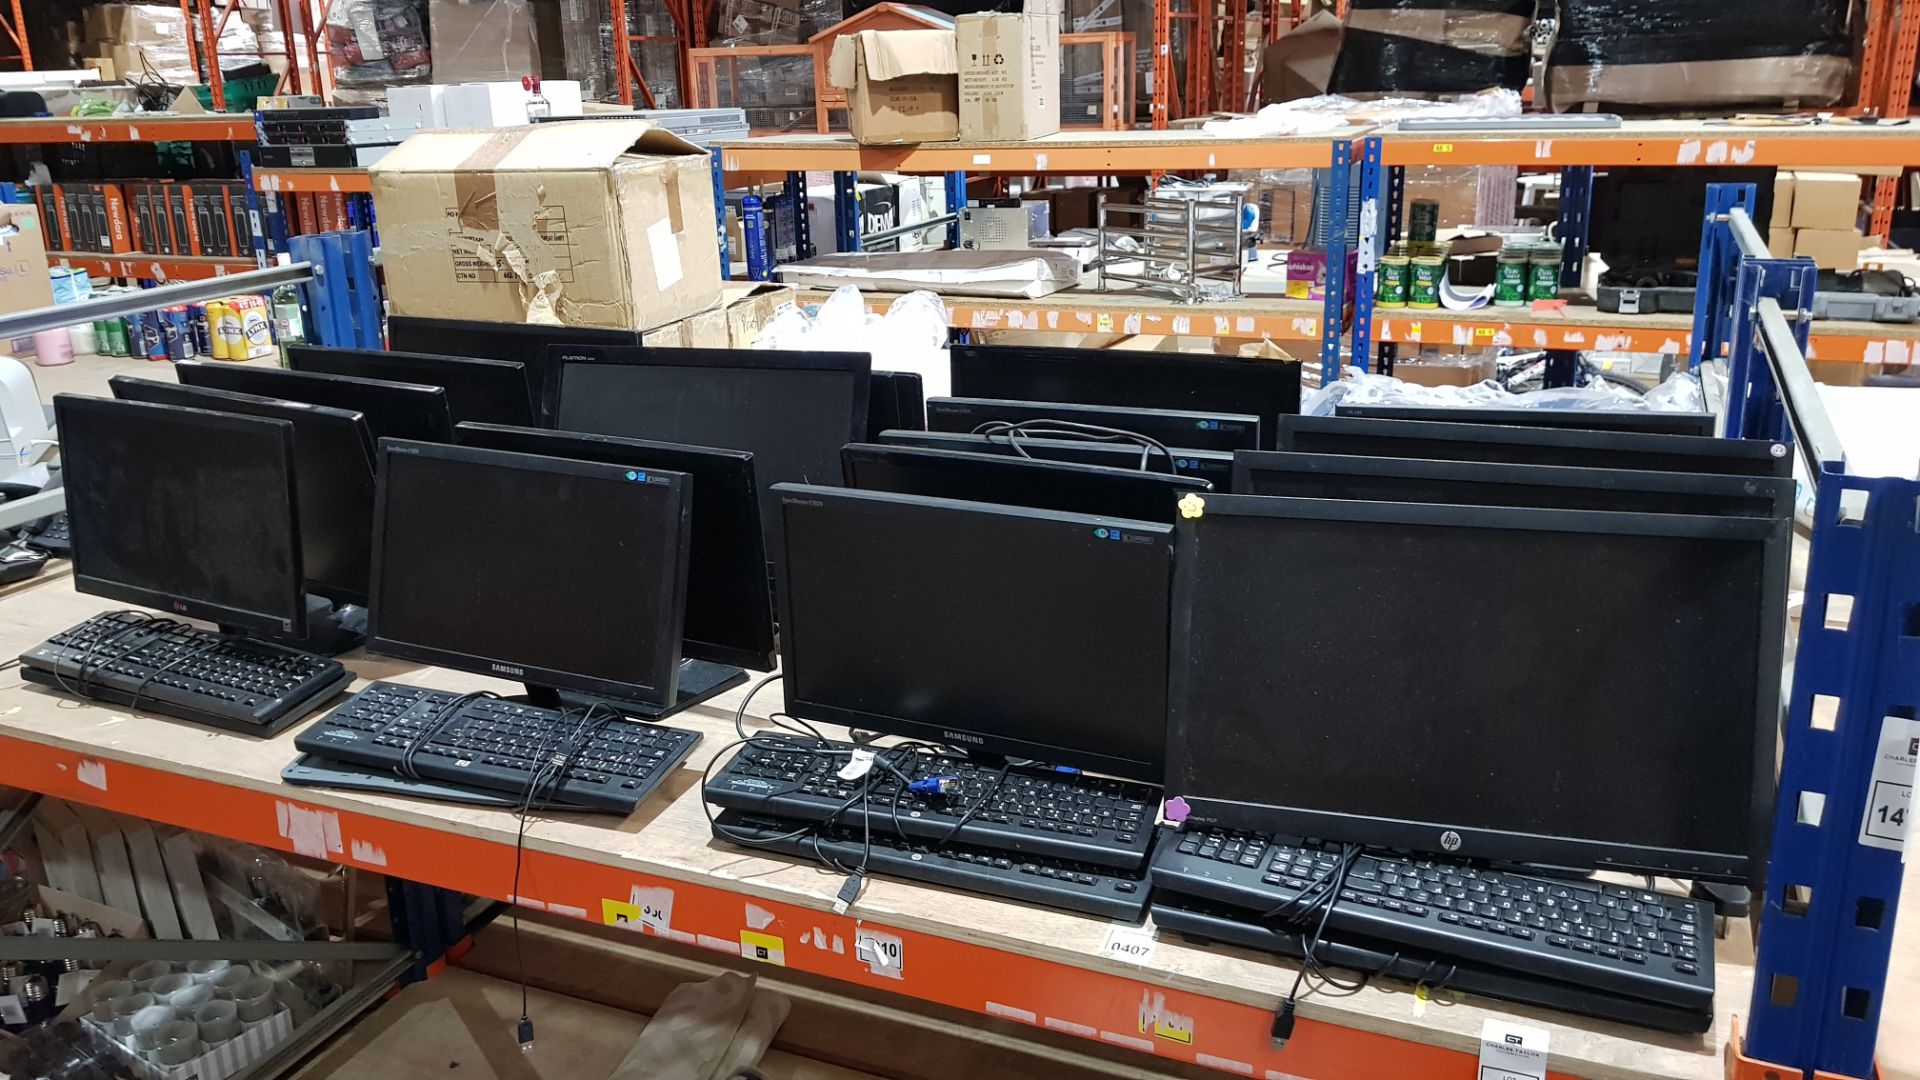 FULL BAY ELECTRONIC MIXED LOT CONTAINING 20 X PC MONITORS (SAMSUNG, LG & HP) AND 8 X KEYBOARDS